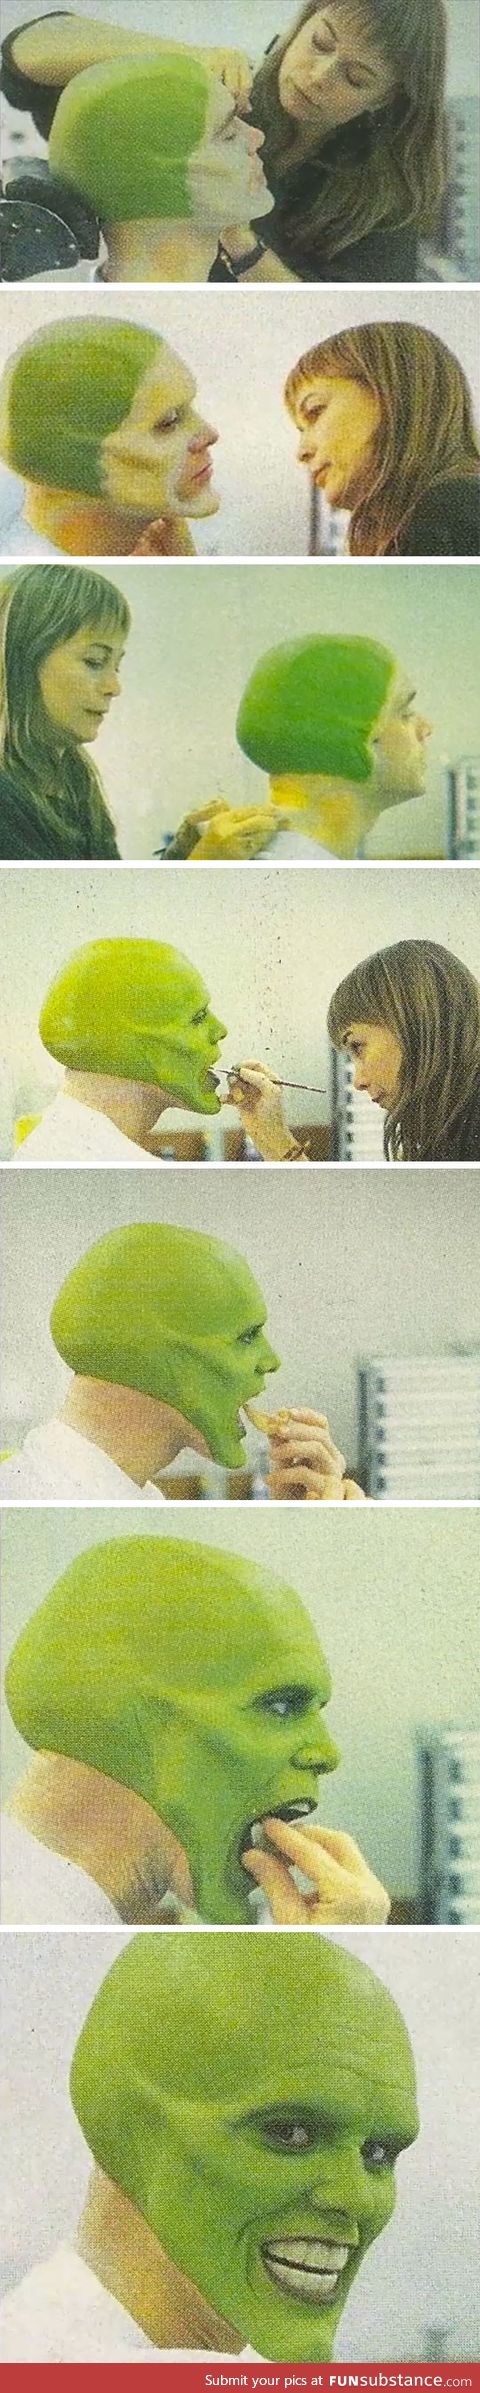 Jim carrey in the makeup chair for 'the mask'